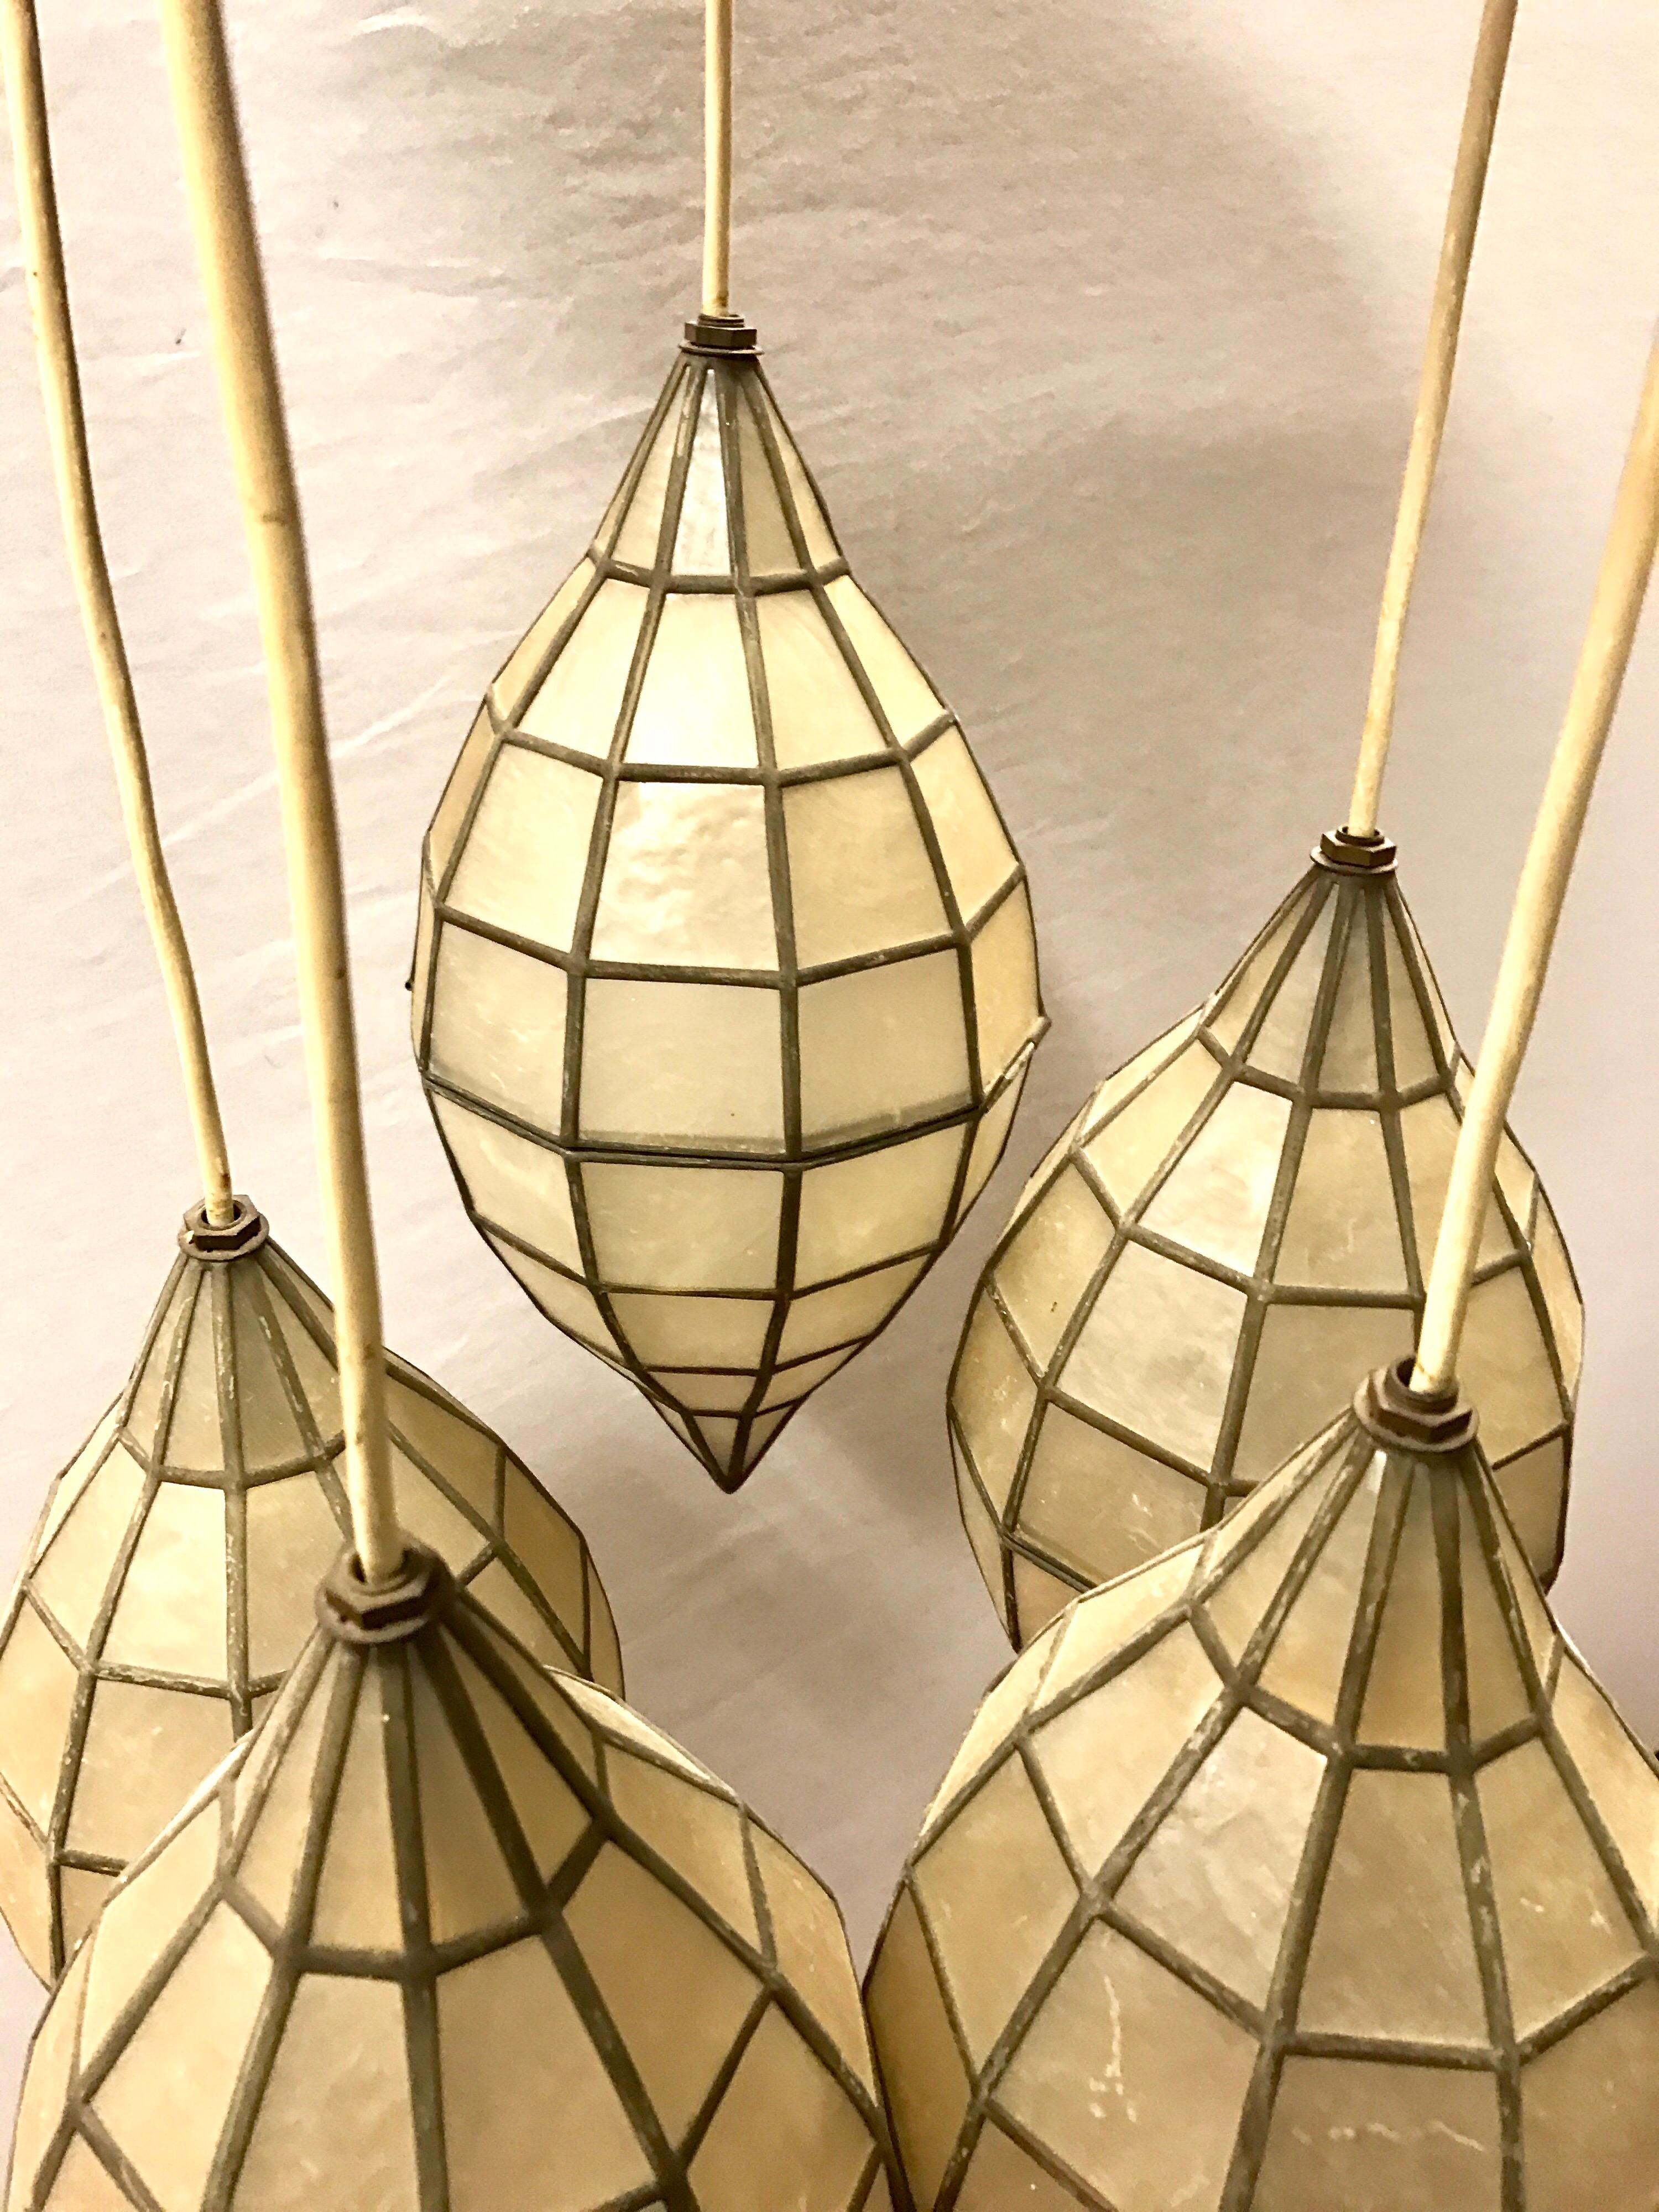 Unusual circa 1970s chandelier with five pendant mother-of-pearl and brass lanterns. Each one opens in the center and is suspended by a white wire that hangs from a round brass ceiling cap. Wire height is adjustable for each. Lanterns are 12 inches